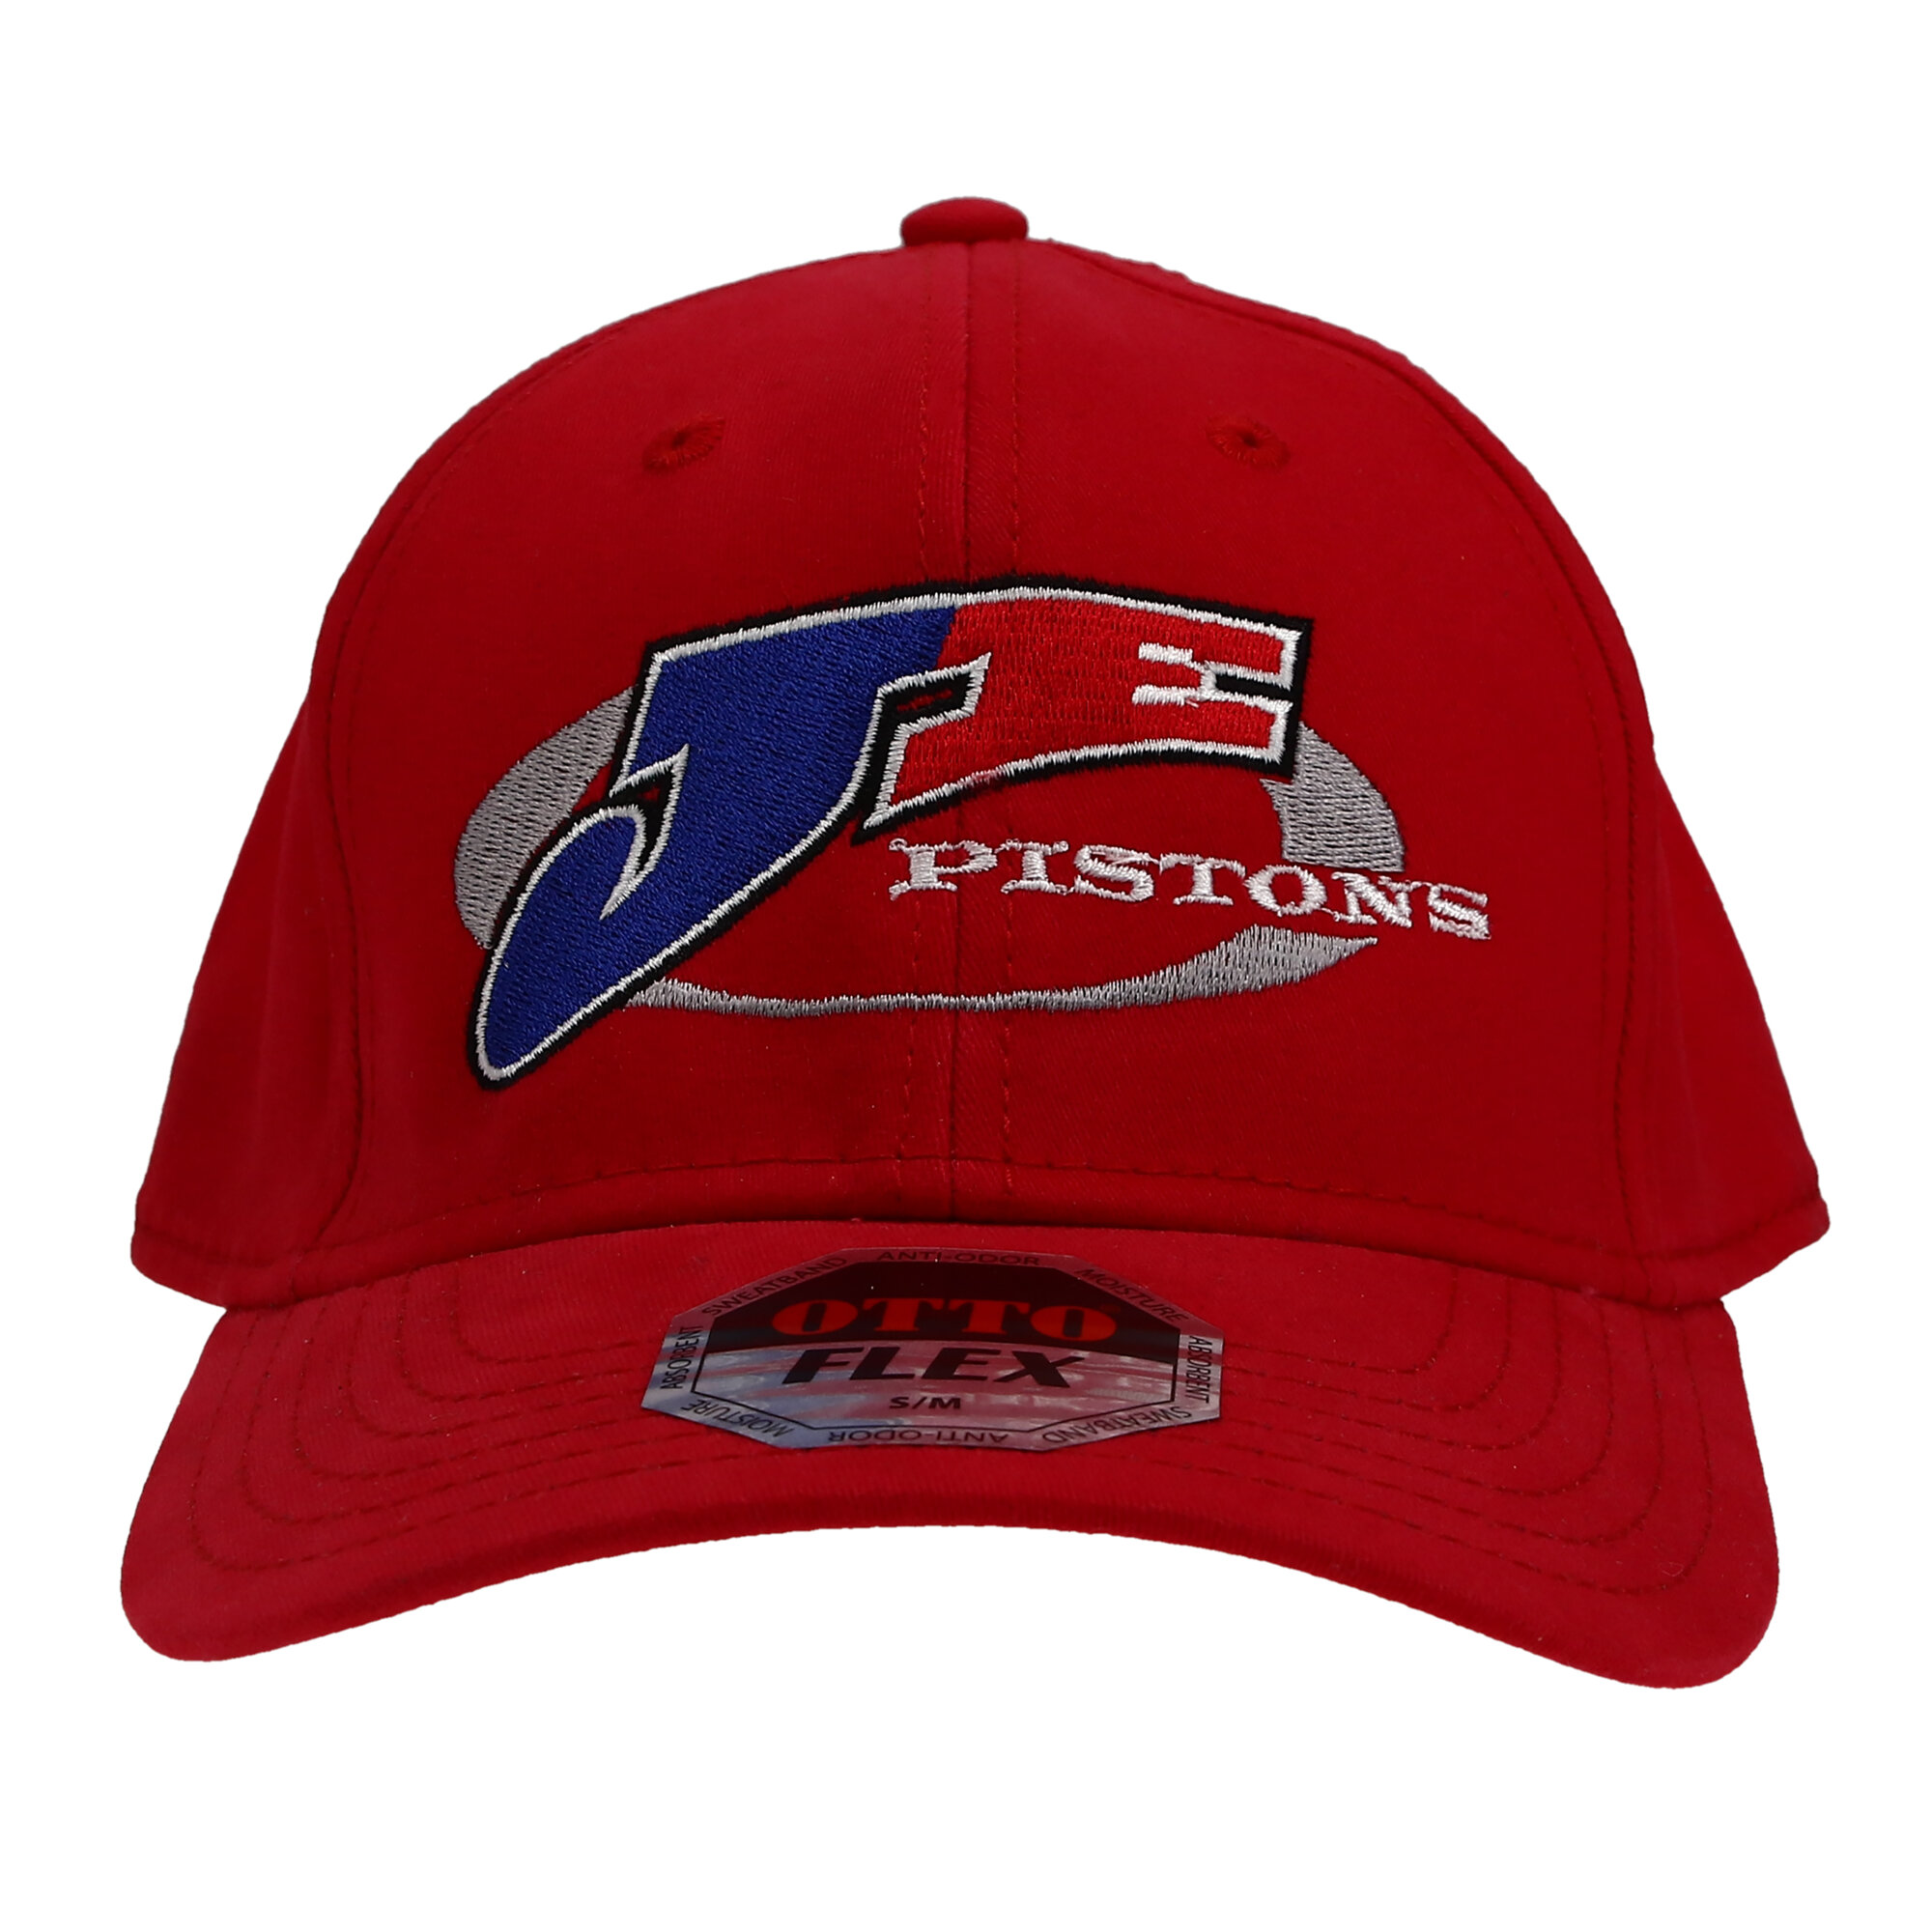 Shop High Quality JE Pistons Curved Bill Hat, Red, Small/Medium